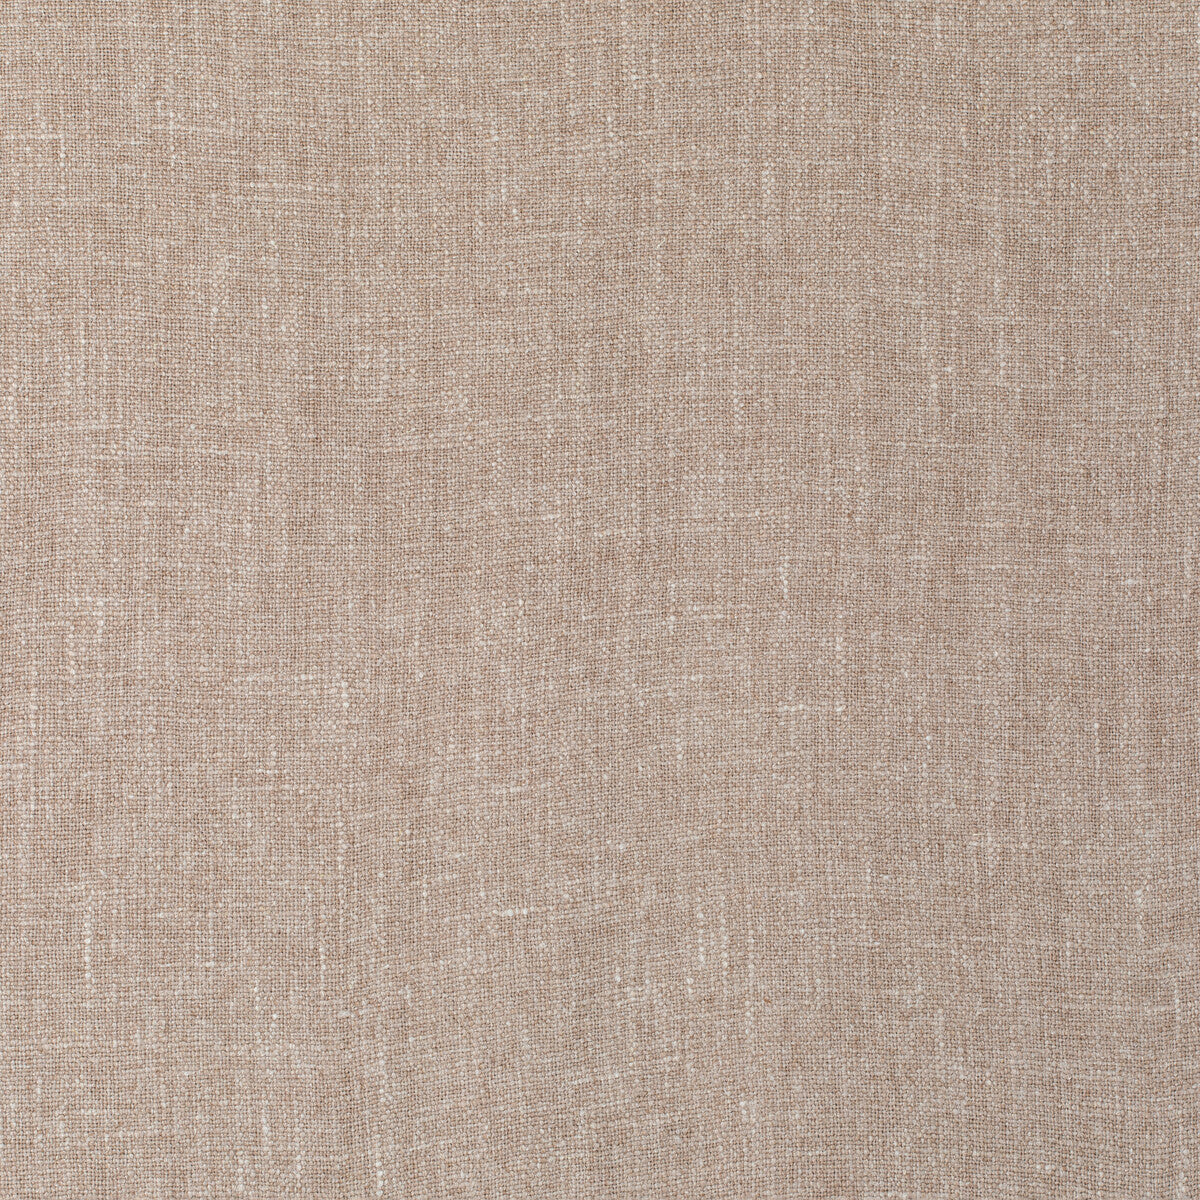 Kepala fabric in blush color - pattern 35889.17.0 - by Kravet Couture in the Linherr Hollingsworth Boheme II collection